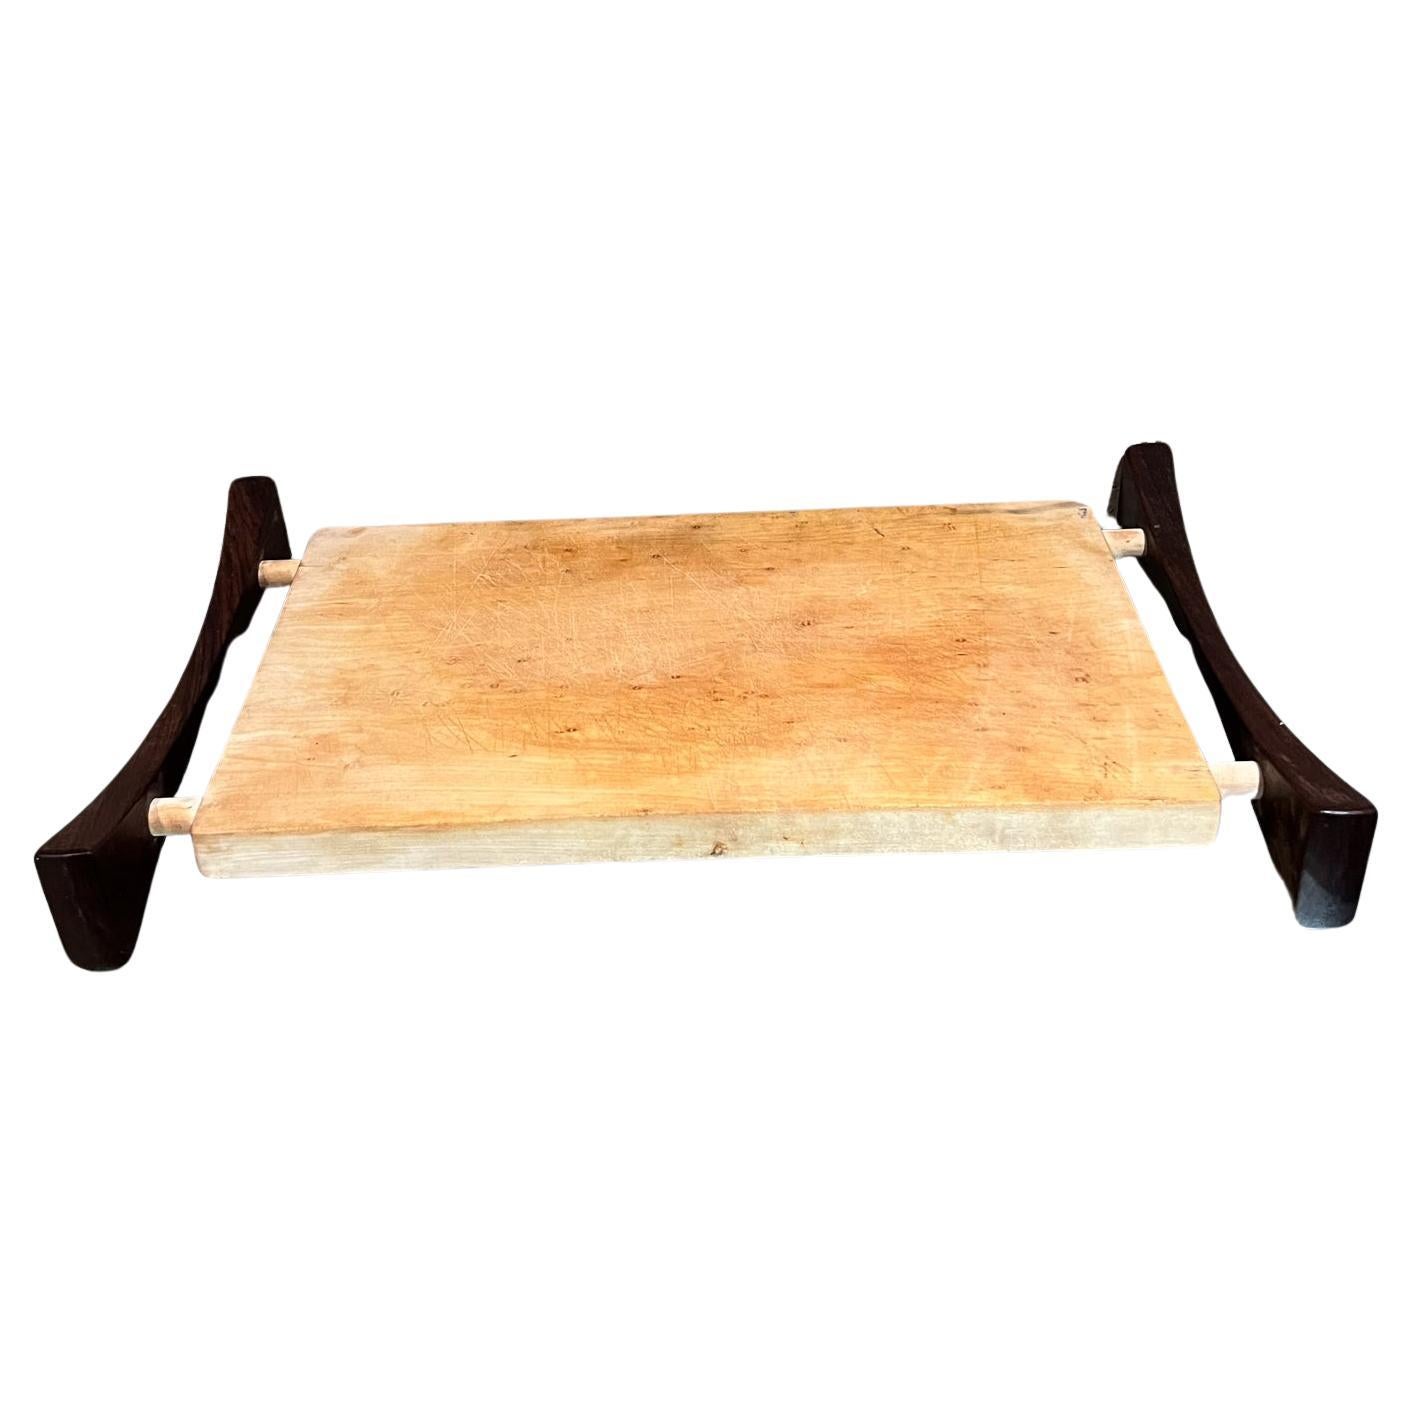 The Modernity Tray Board Platter Two-tone Wood